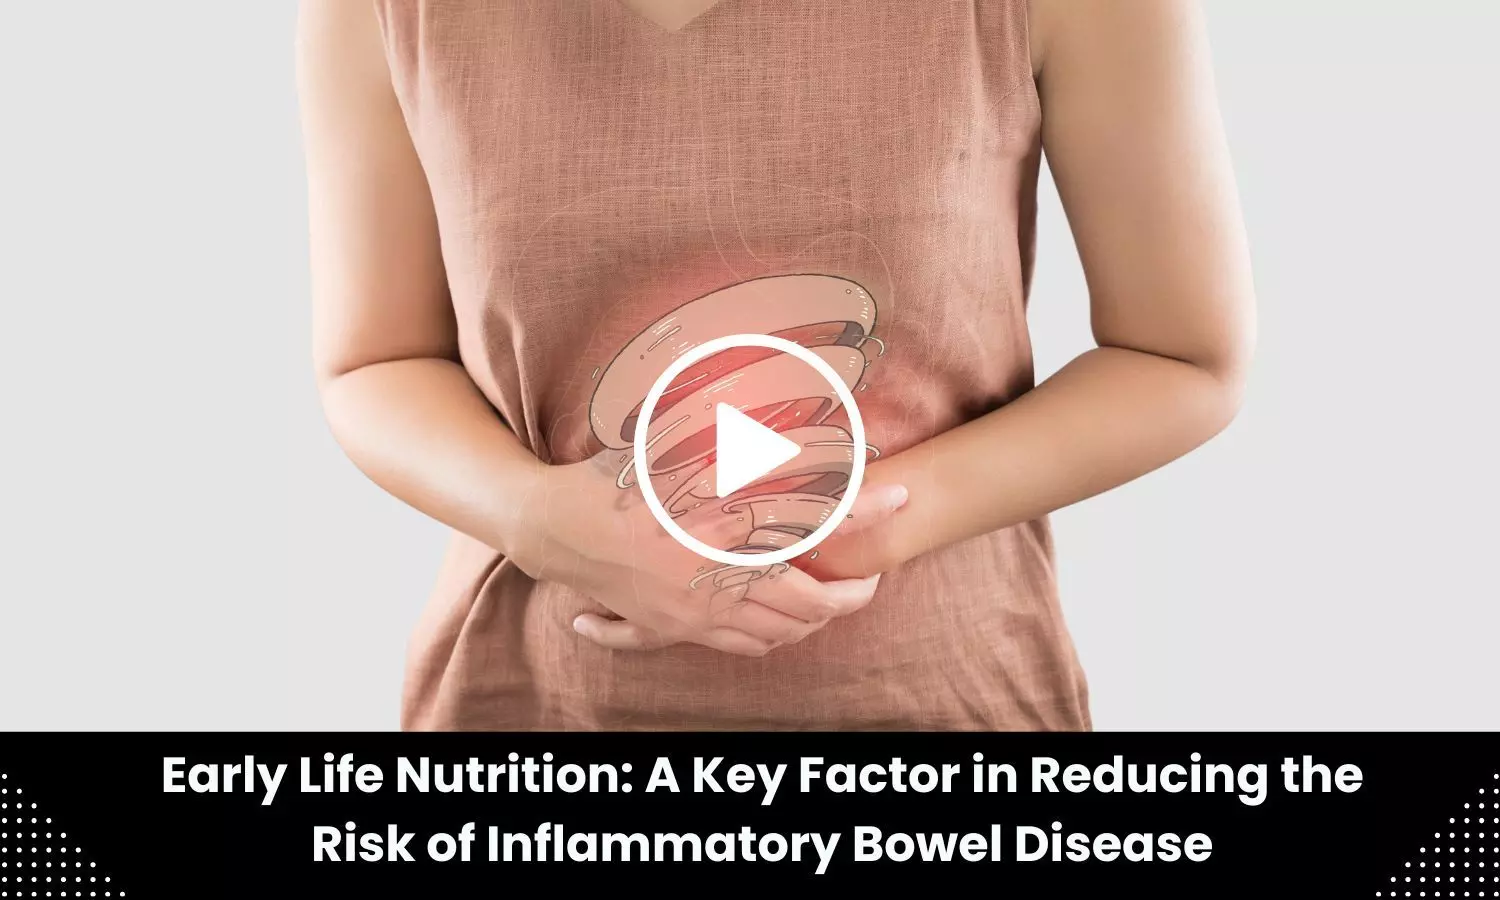 Early Life Nutrition: A Key Factor in Reducing the Risk of Inflammatory Bowel Disease